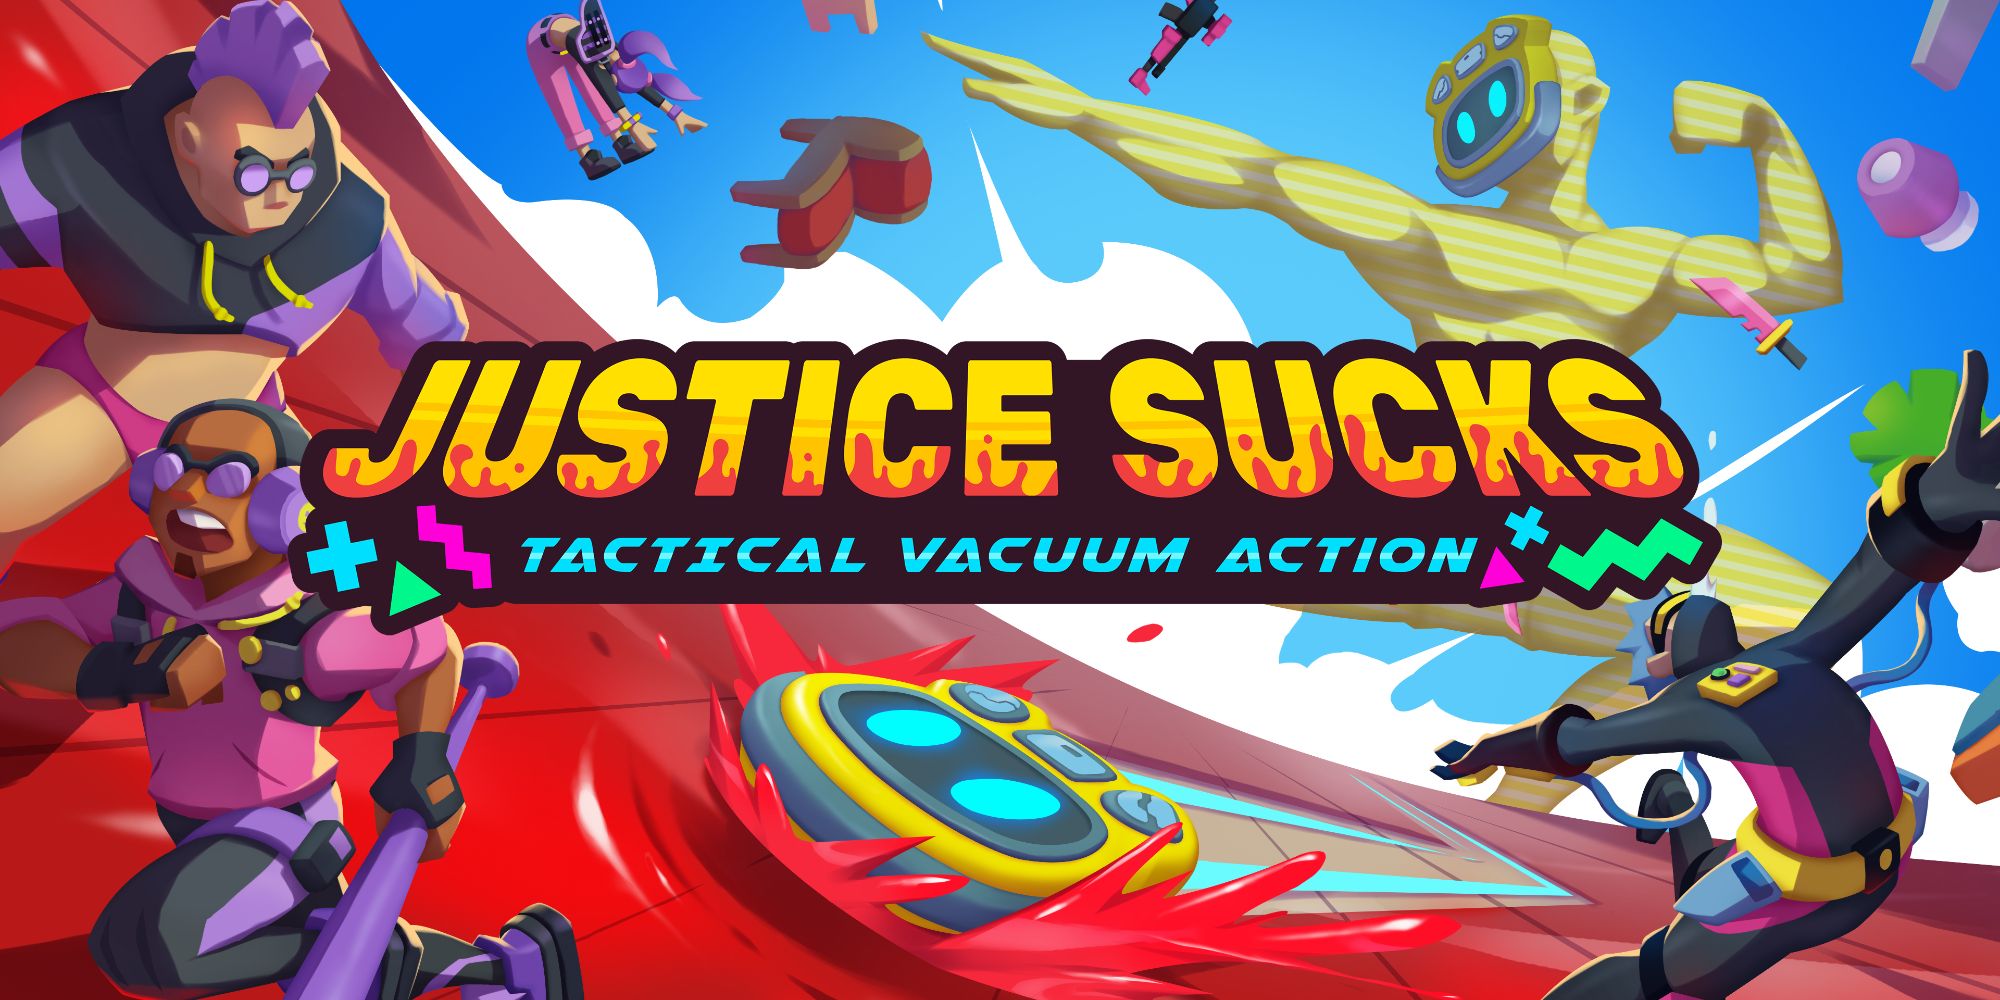 Justice Sucks Review title and key art